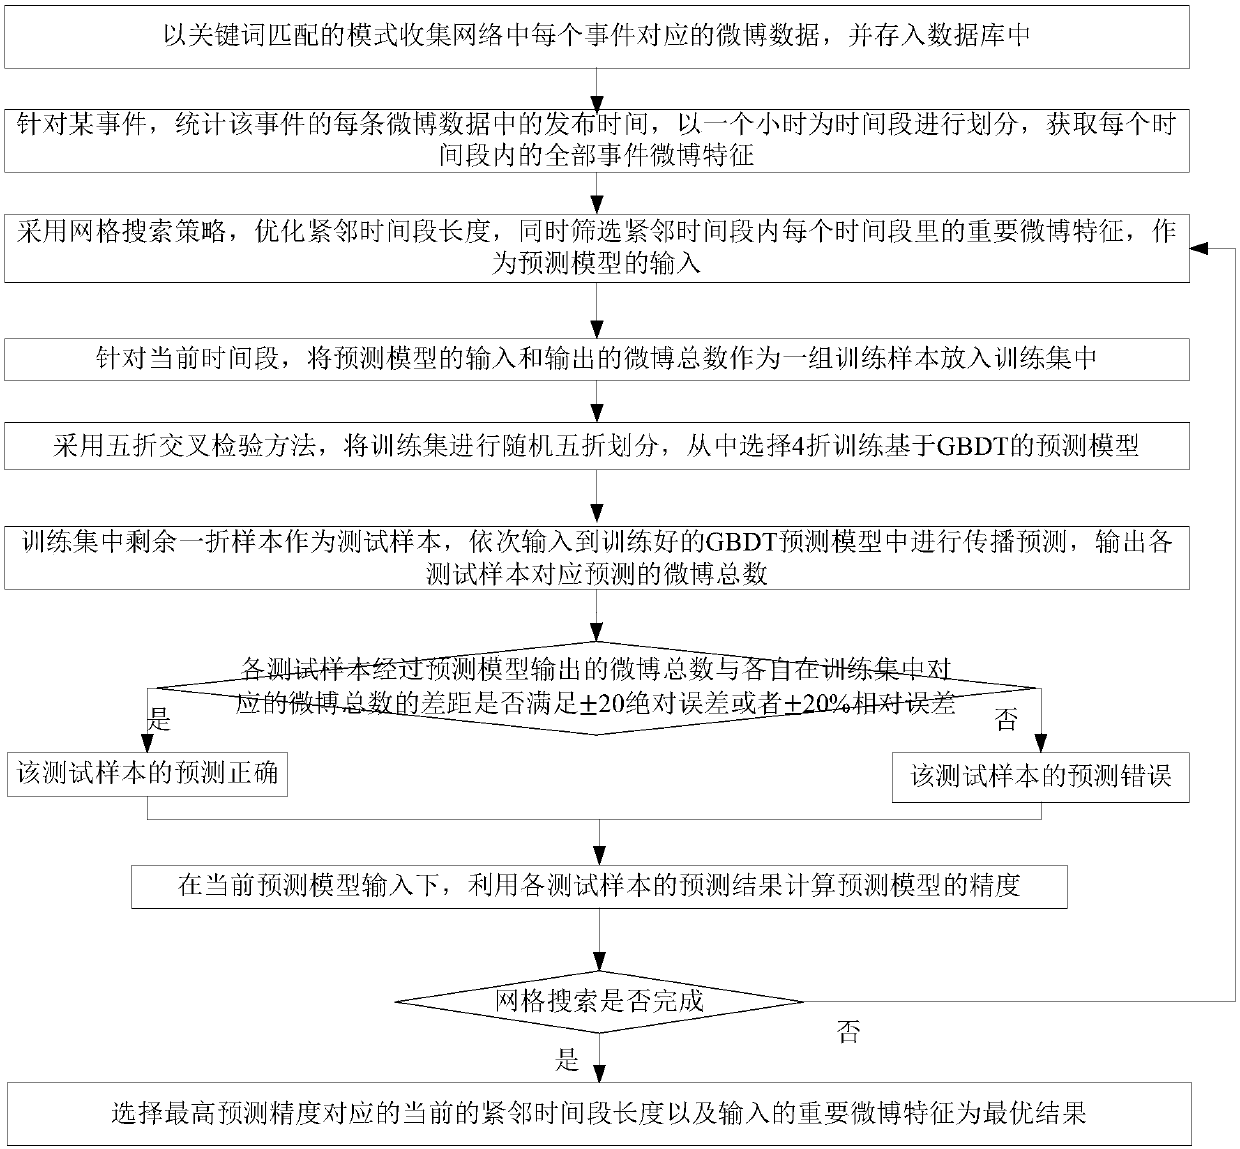 Weibo event information propagation continuous dynamic prediction method